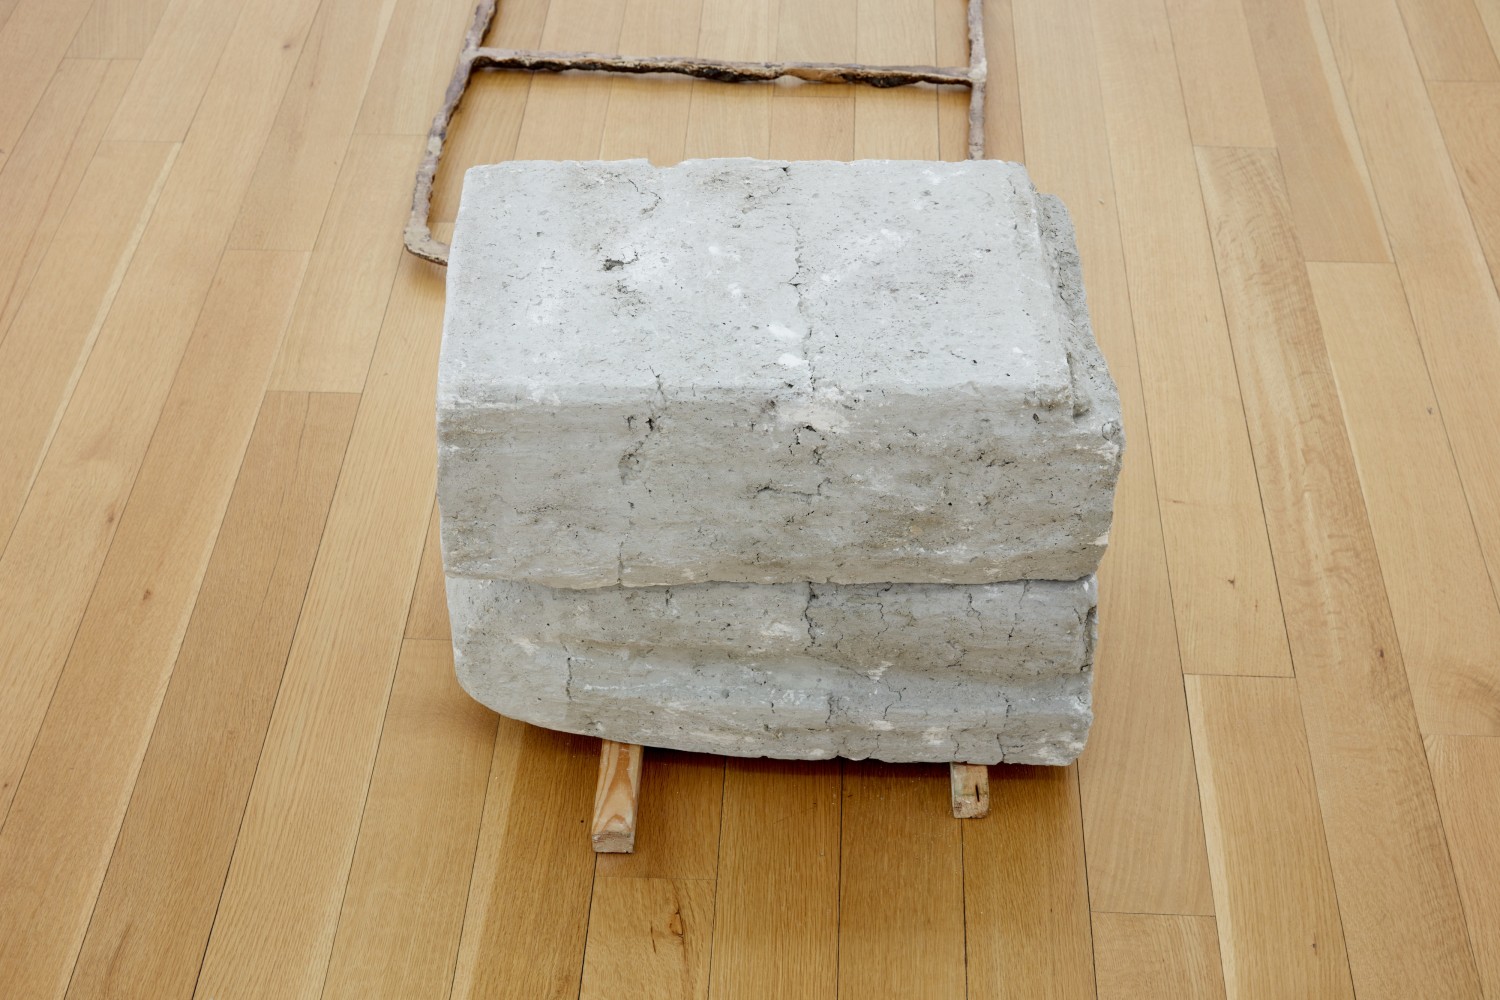 Esther Kläs BEGINNINGS, 2021 concrete, bronze, pigment and wood 18 x 68 x 27 inches (46 x 173 x 69 cm), overall